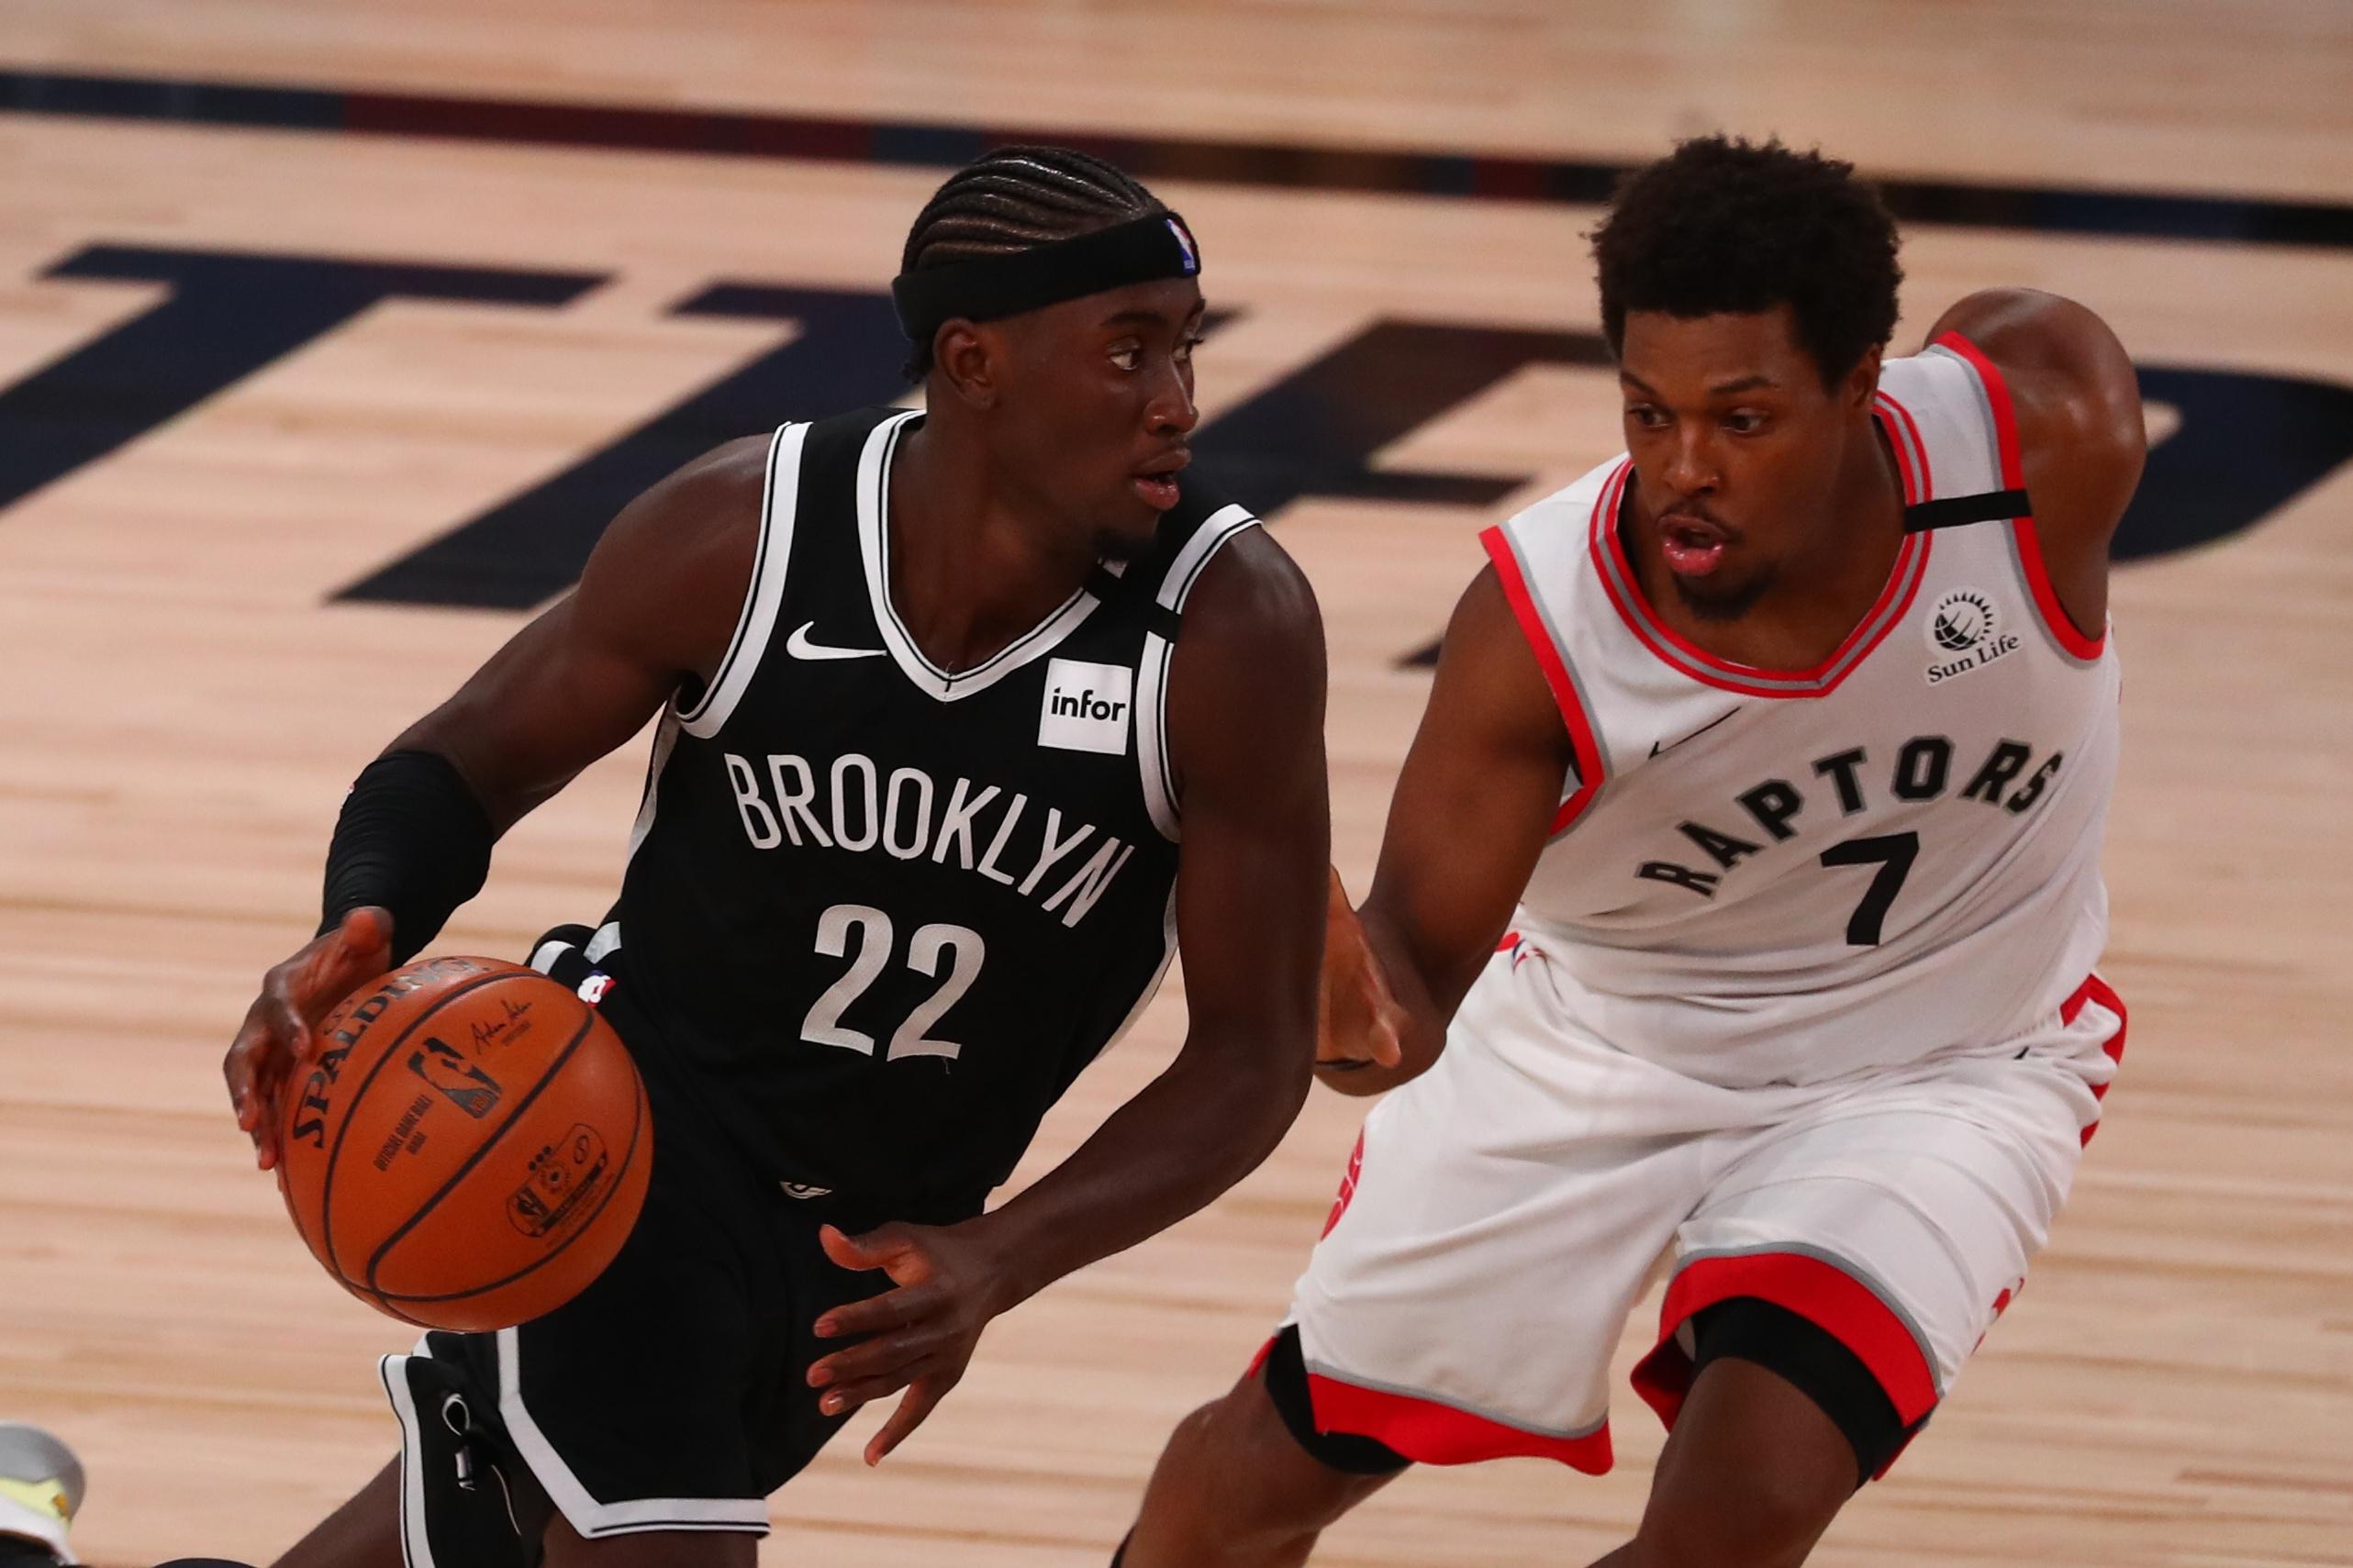 Caris LeVert drives to the basket against Kyle Lowry / USA TODAY